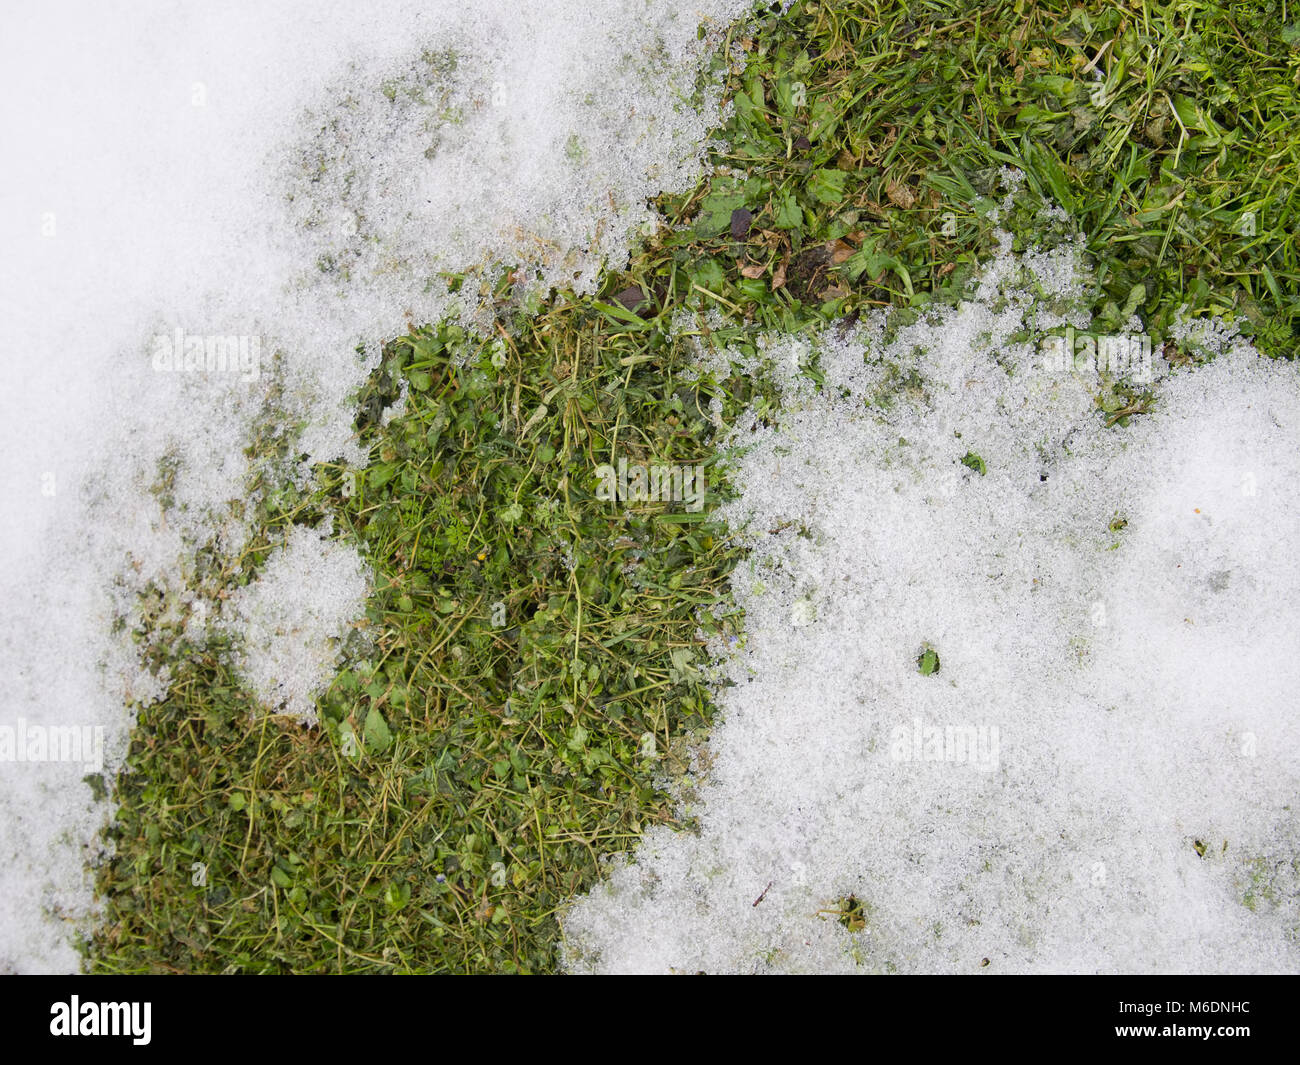 Melting snow on lawn, thaw. Stock Photo